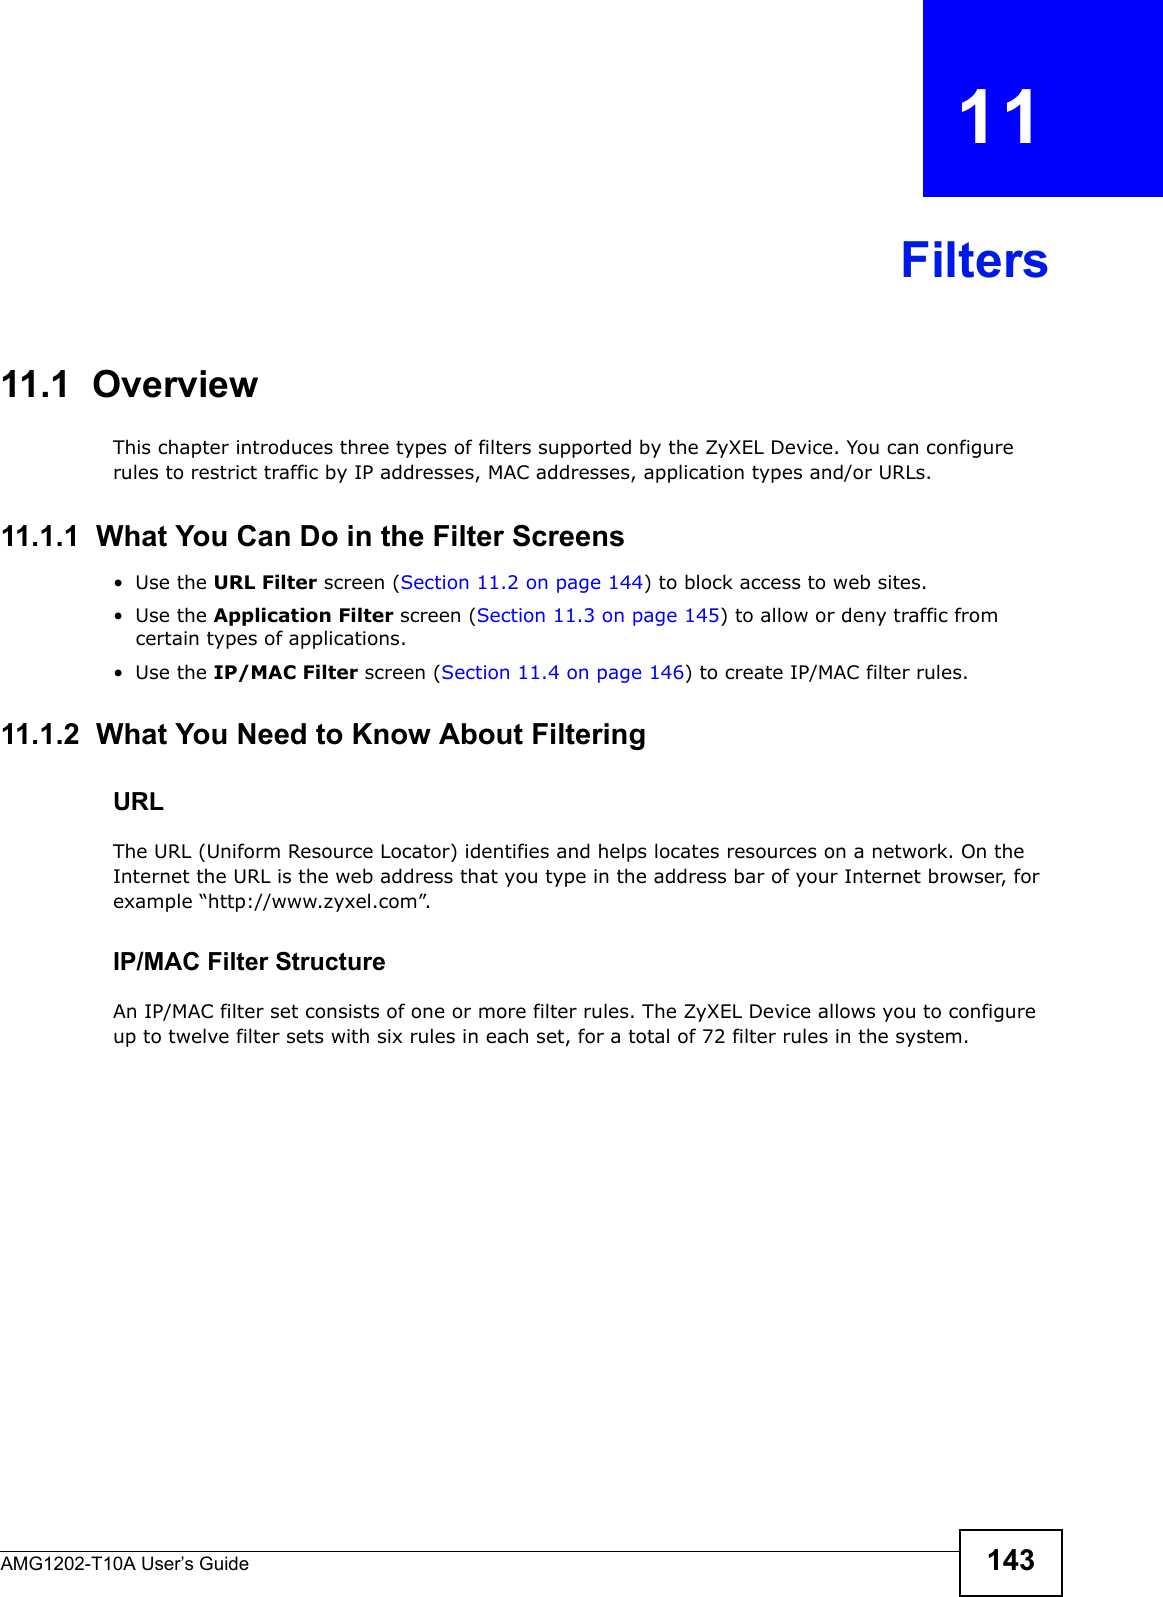 AMG1202-T10A User’s Guide 143CHAPTER   11Filters11.1  Overview This chapter introduces three types of filters supported by the ZyXEL Device. You can configure rules to restrict traffic by IP addresses, MAC addresses, application types and/or URLs.11.1.1  What You Can Do in the Filter Screens•Use the URL Filter screen (Section 11.2 on page 144) to block access to web sites.•Use the Application Filter screen (Section 11.3 on page 145) to allow or deny traffic from certain types of applications.•Use the IP/MAC Filter screen (Section 11.4 on page 146) to create IP/MAC filter rules.11.1.2  What You Need to Know About FilteringURLThe URL (Uniform Resource Locator) identifies and helps locates resources on a network. On the Internet the URL is the web address that you type in the address bar of your Internet browser, for example “http://www.zyxel.com”.IP/MAC Filter StructureAn IP/MAC filter set consists of one or more filter rules. The ZyXEL Device allows you to configure up to twelve filter sets with six rules in each set, for a total of 72 filter rules in the system.